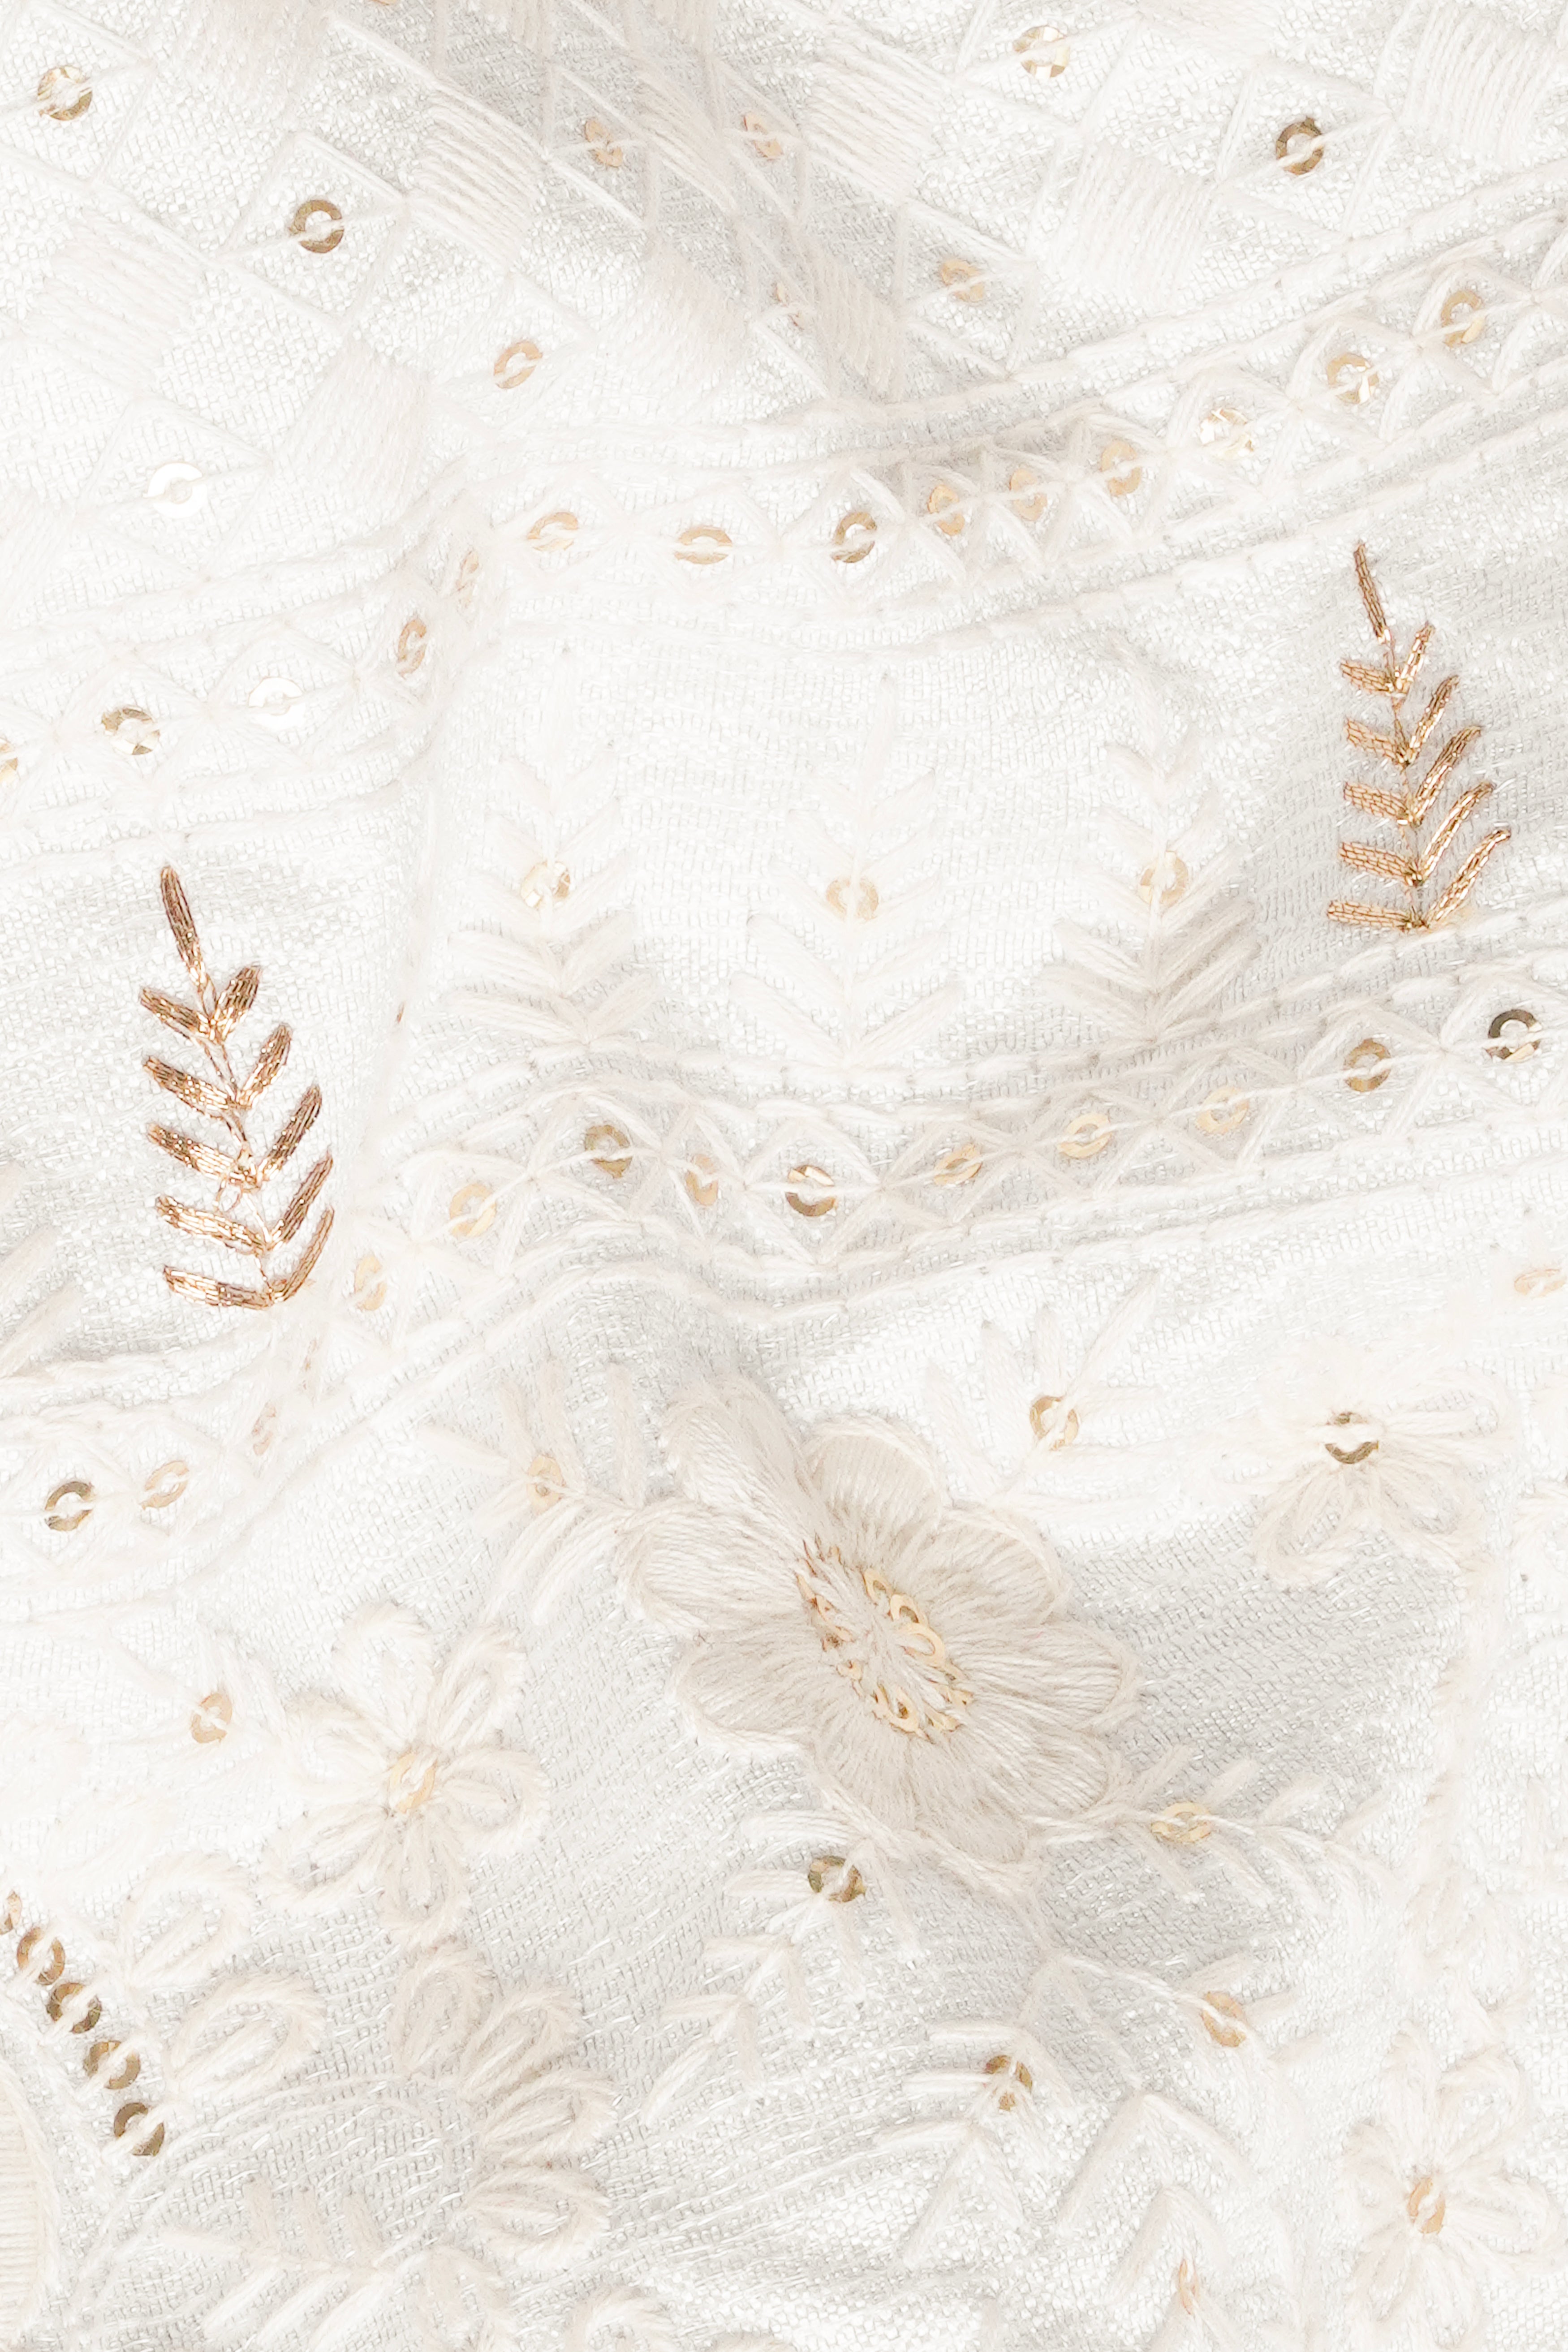 Sand Cream Thread and Sequin Embroidered Bandhgala Jodhpuri BL3538-BG-36, BL3538-BG-38, BL3538-BG-40, BL3538-BG-42, BL3538-BG-44, BL3538-BG-46, BL3538-BG-48, BL3538-BG-50, BL3538-BG-52, BL3538-BG-54, BL3538-BG-56, BL3538-BG-58, BL3538-BG-60